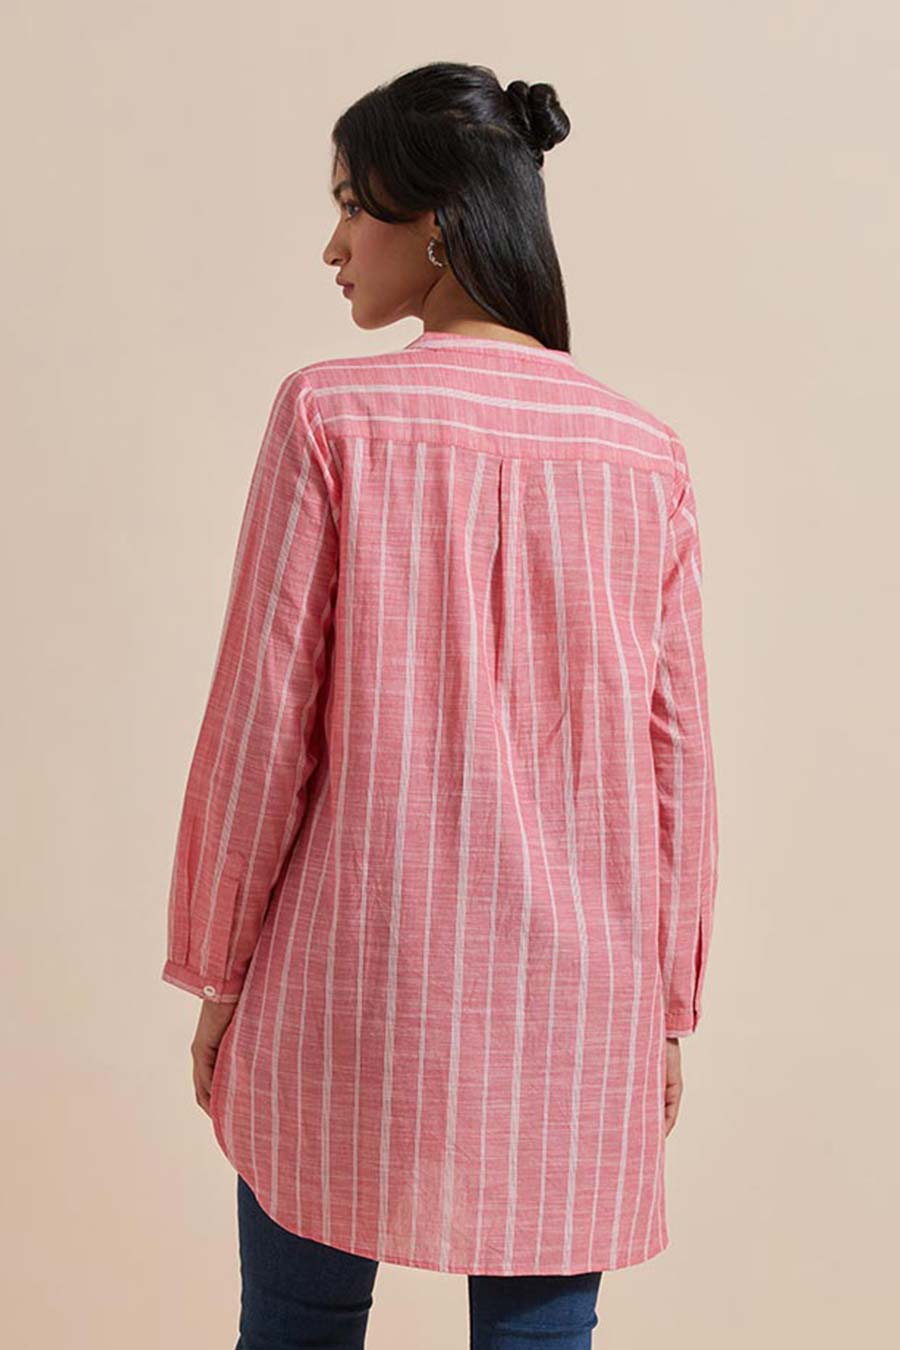 Pink Stripe Embroidered Tunic